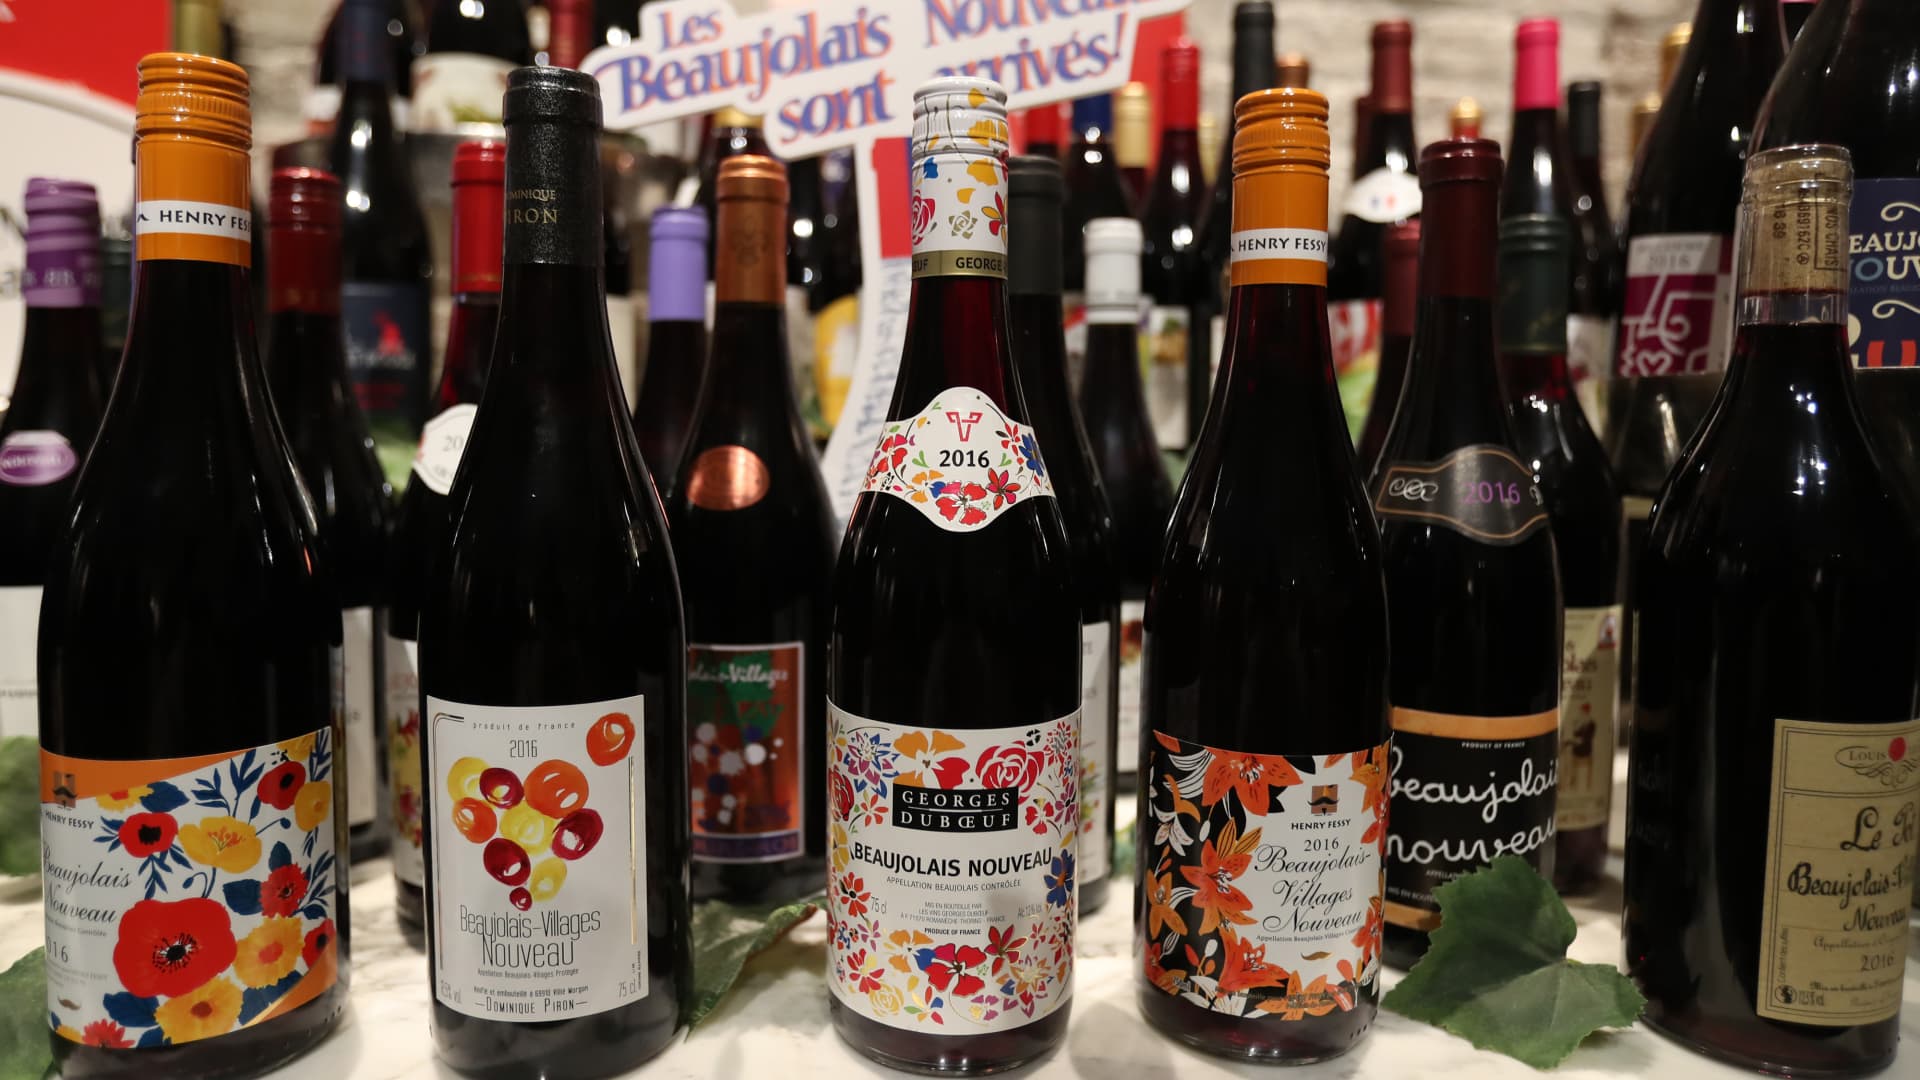 Bottles of the 2016 vintage Beaujolais Nouveau wine are displayed at a countdown event in Tokyo on November 17, 2016.